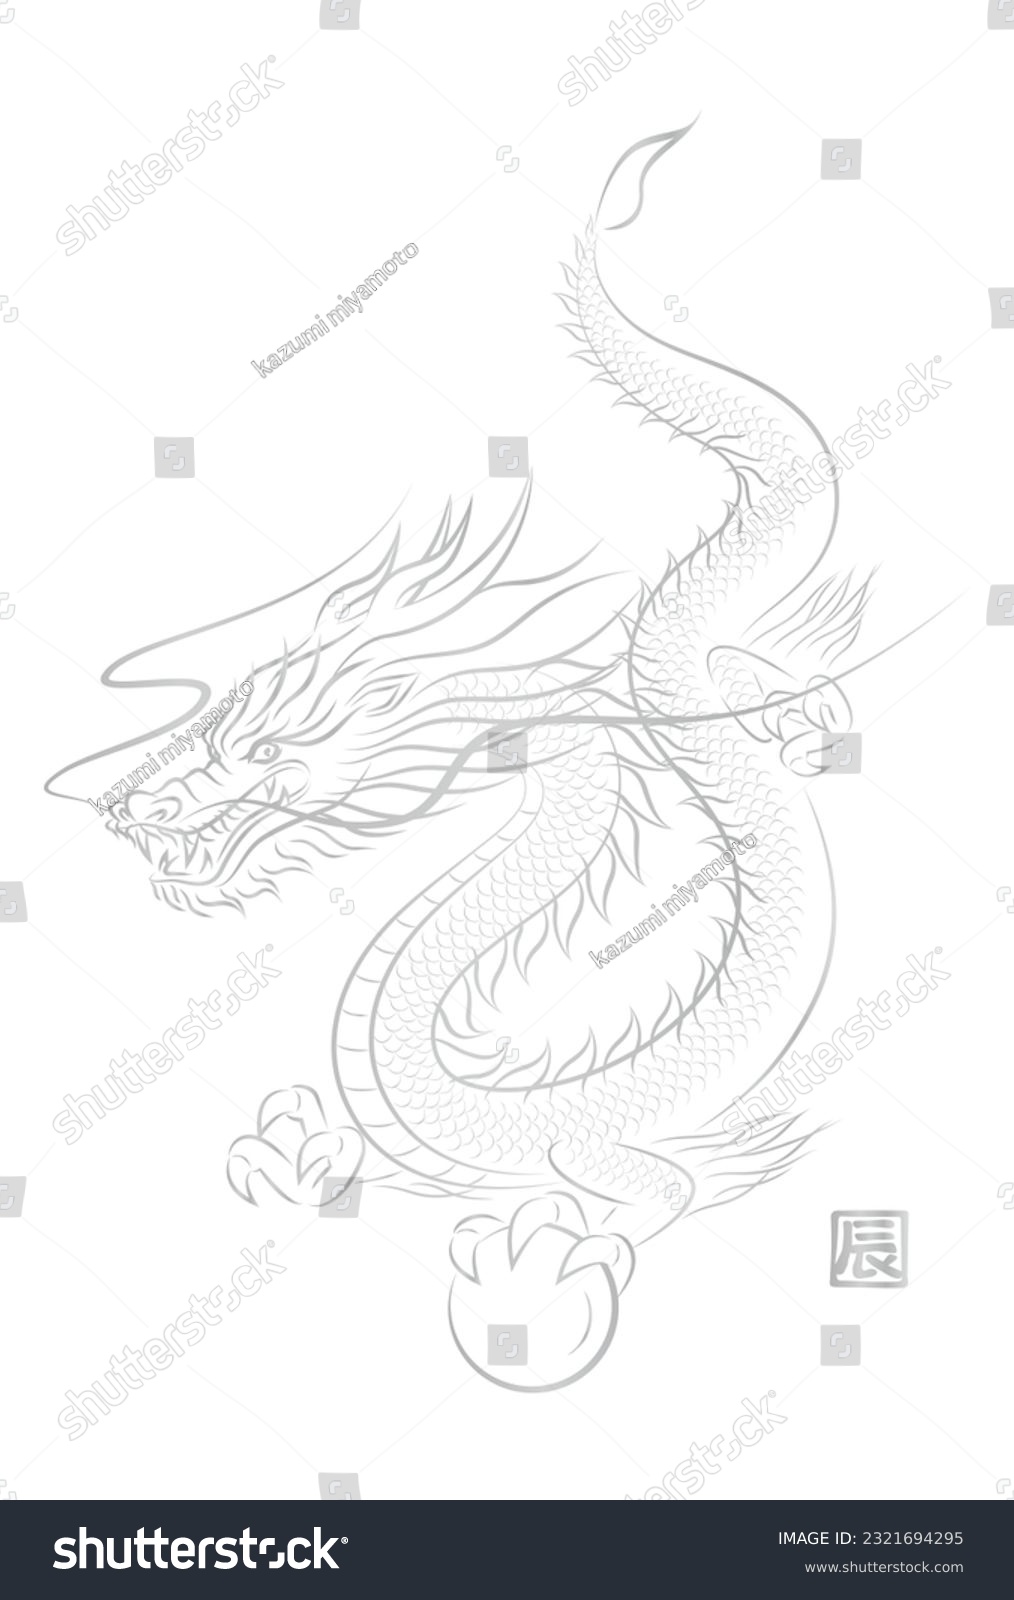 SVG of Illustration of silver dragon flying with dragon ball.  Stylish New Year's card template for the year of the dragon in ink painting style . Vector. 辰 means 